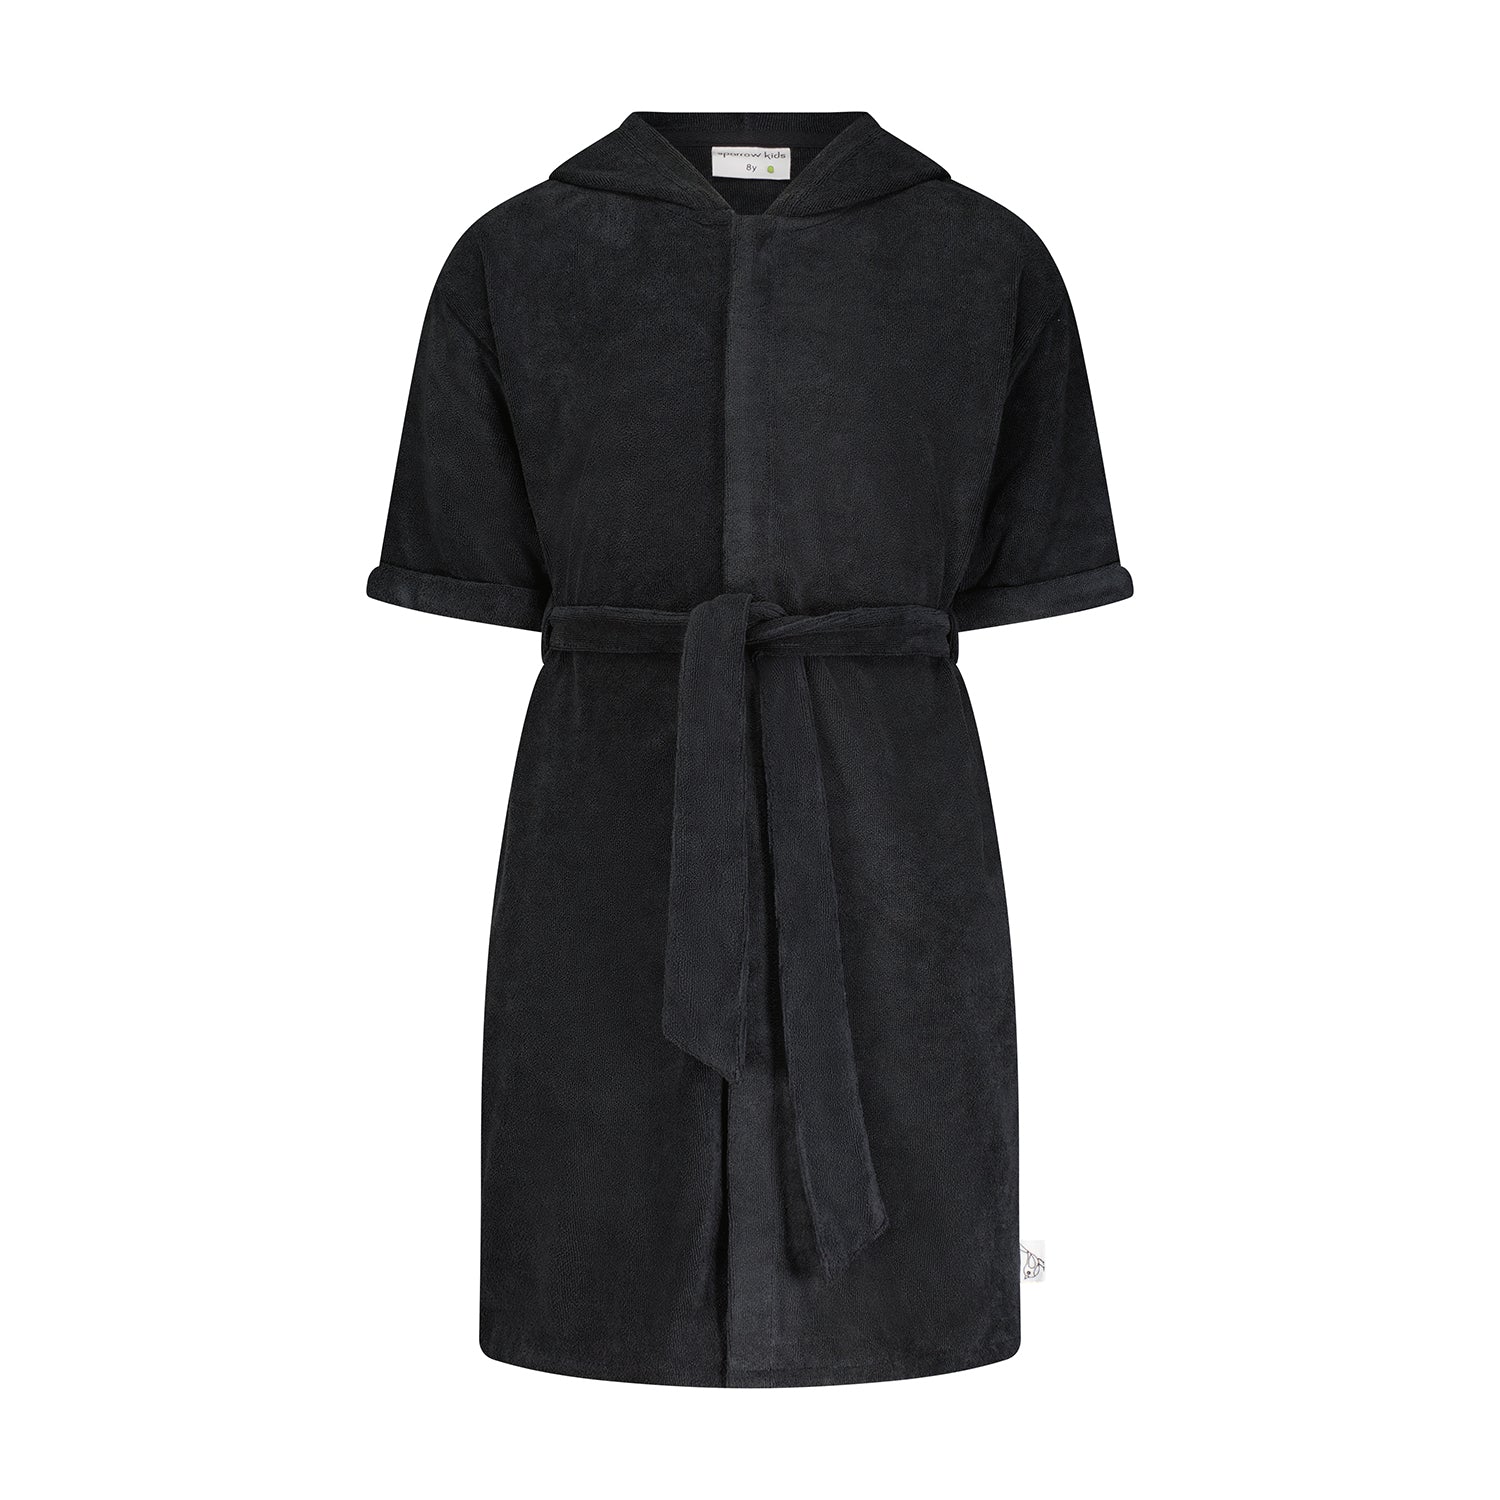 Sparrow Kids Terry Cover Up - Black